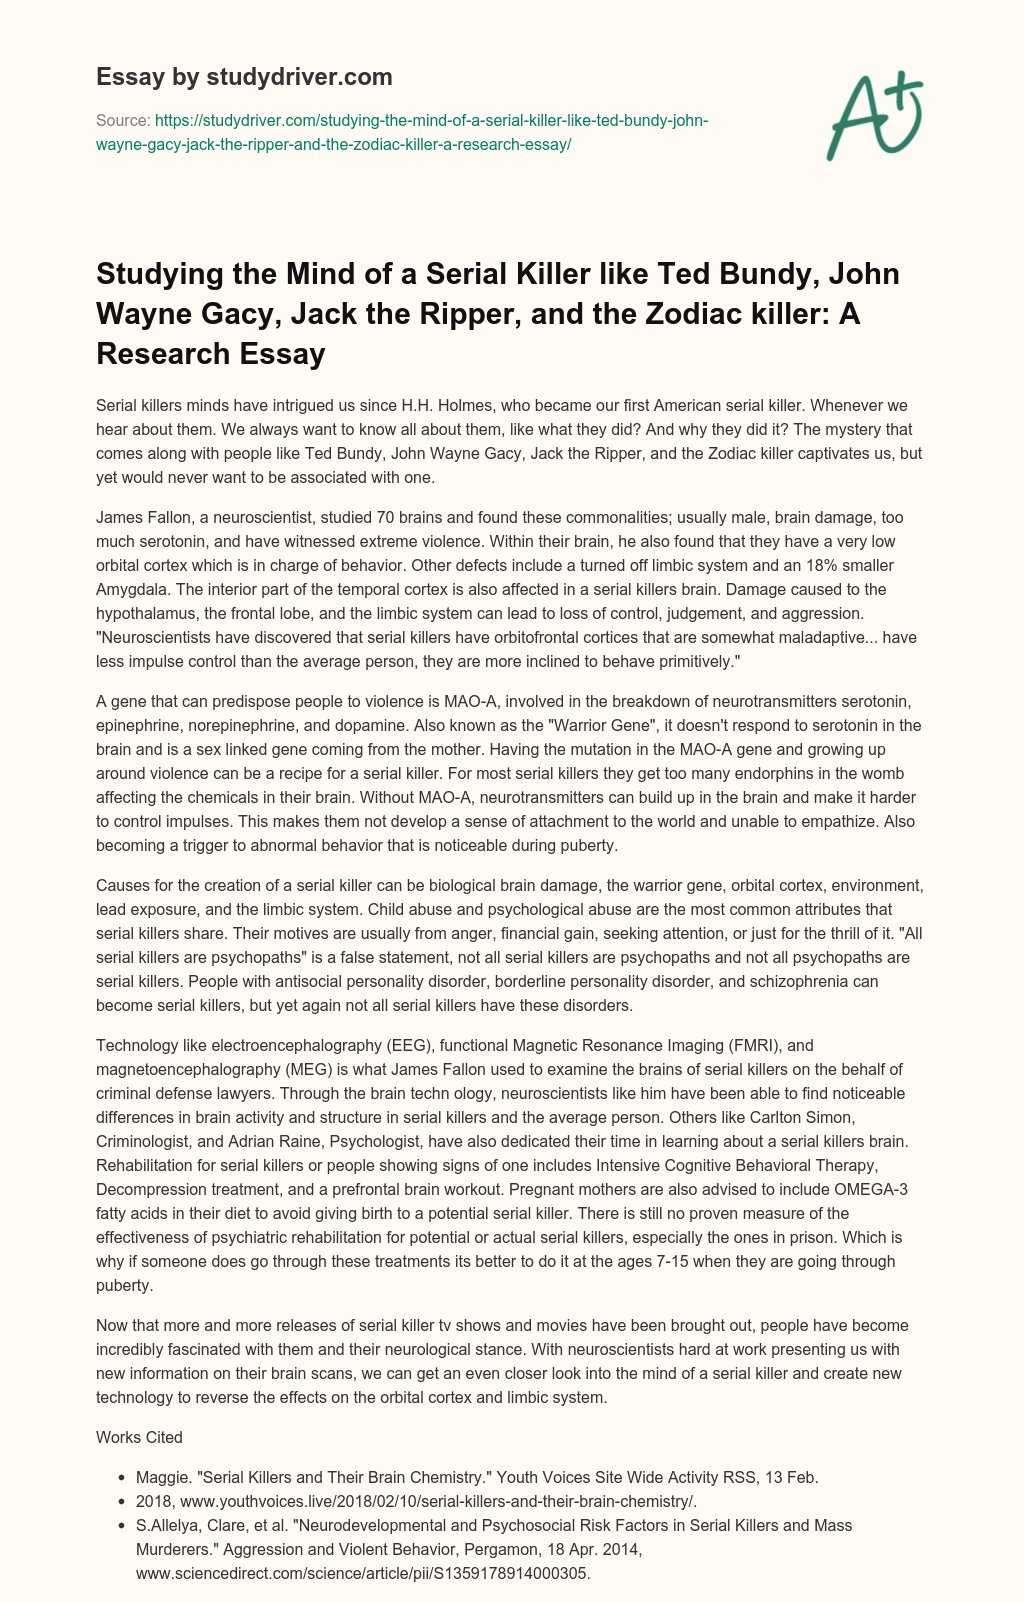 Studying the Mind of a Serial Killer Like Ted Bundy, John Wayne Gacy, Jack the Ripper, and the Zodiac Killer: a Research Essay essay